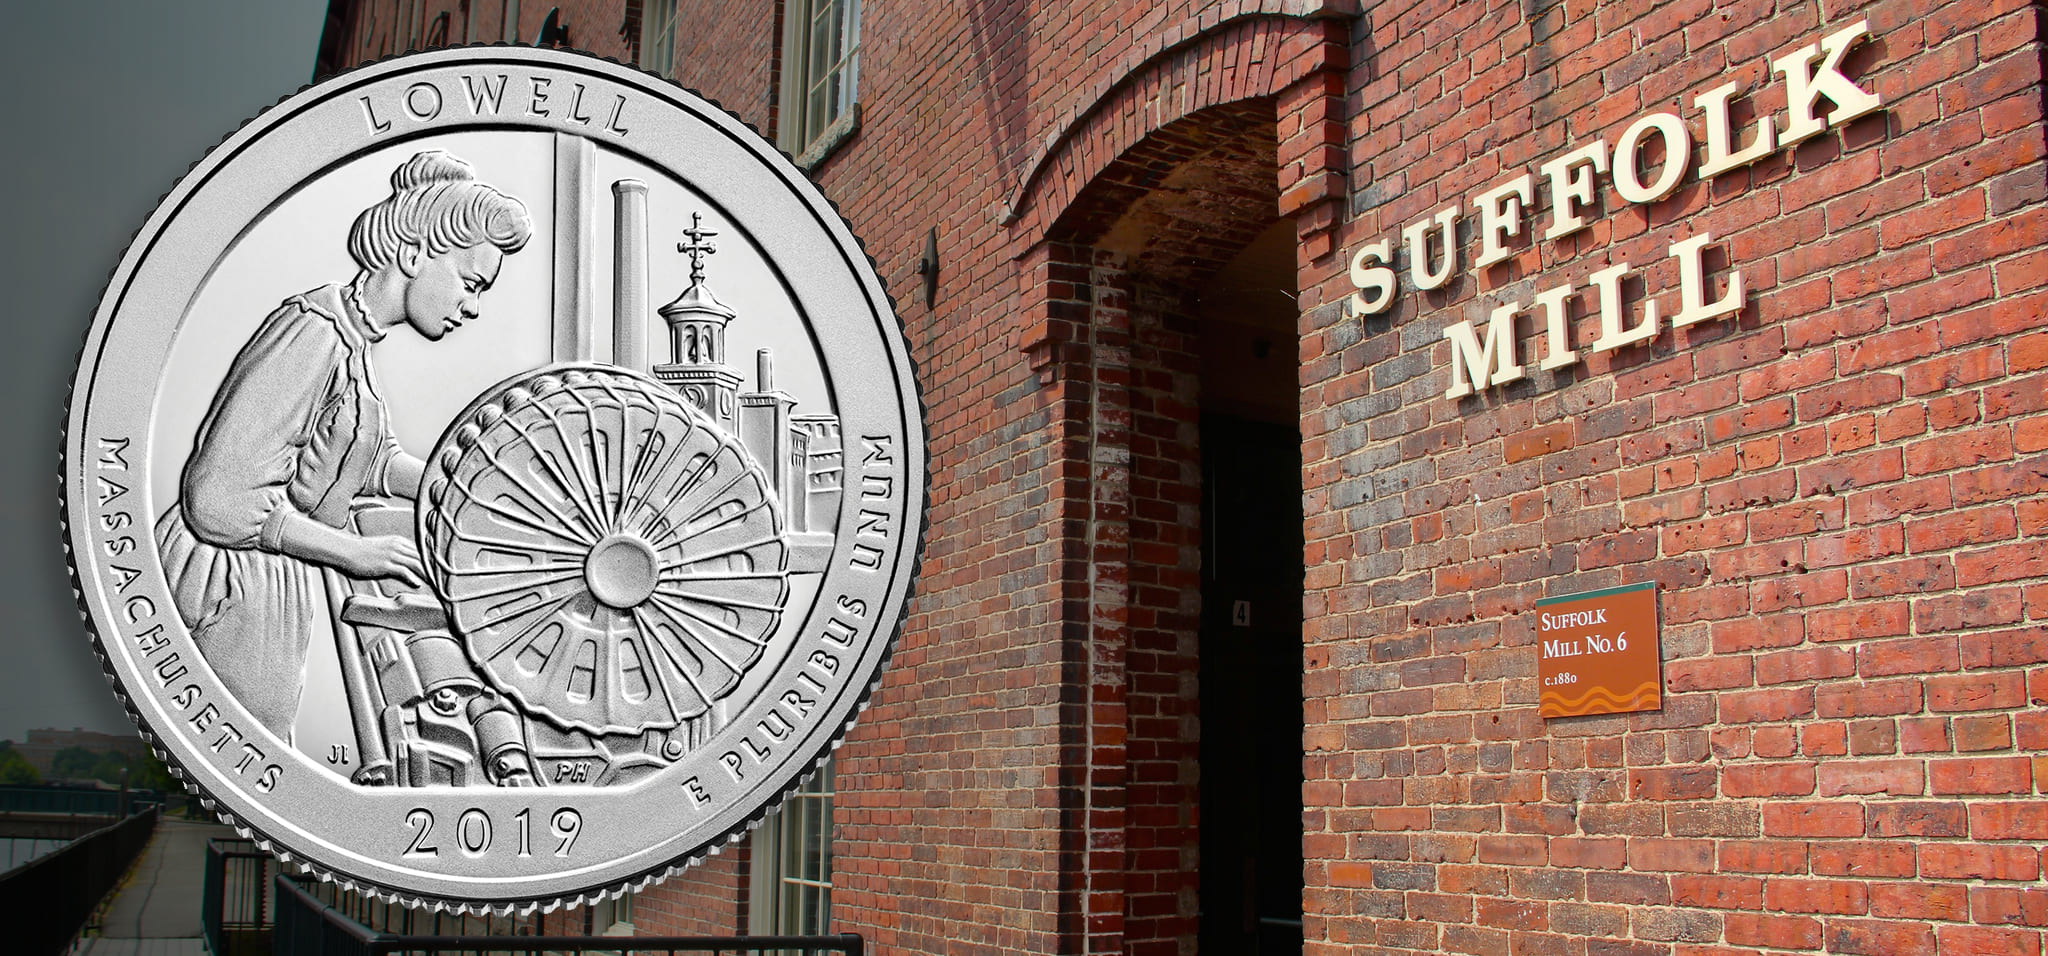 Lowell National Historical Park featured on 46th National Park Quarter